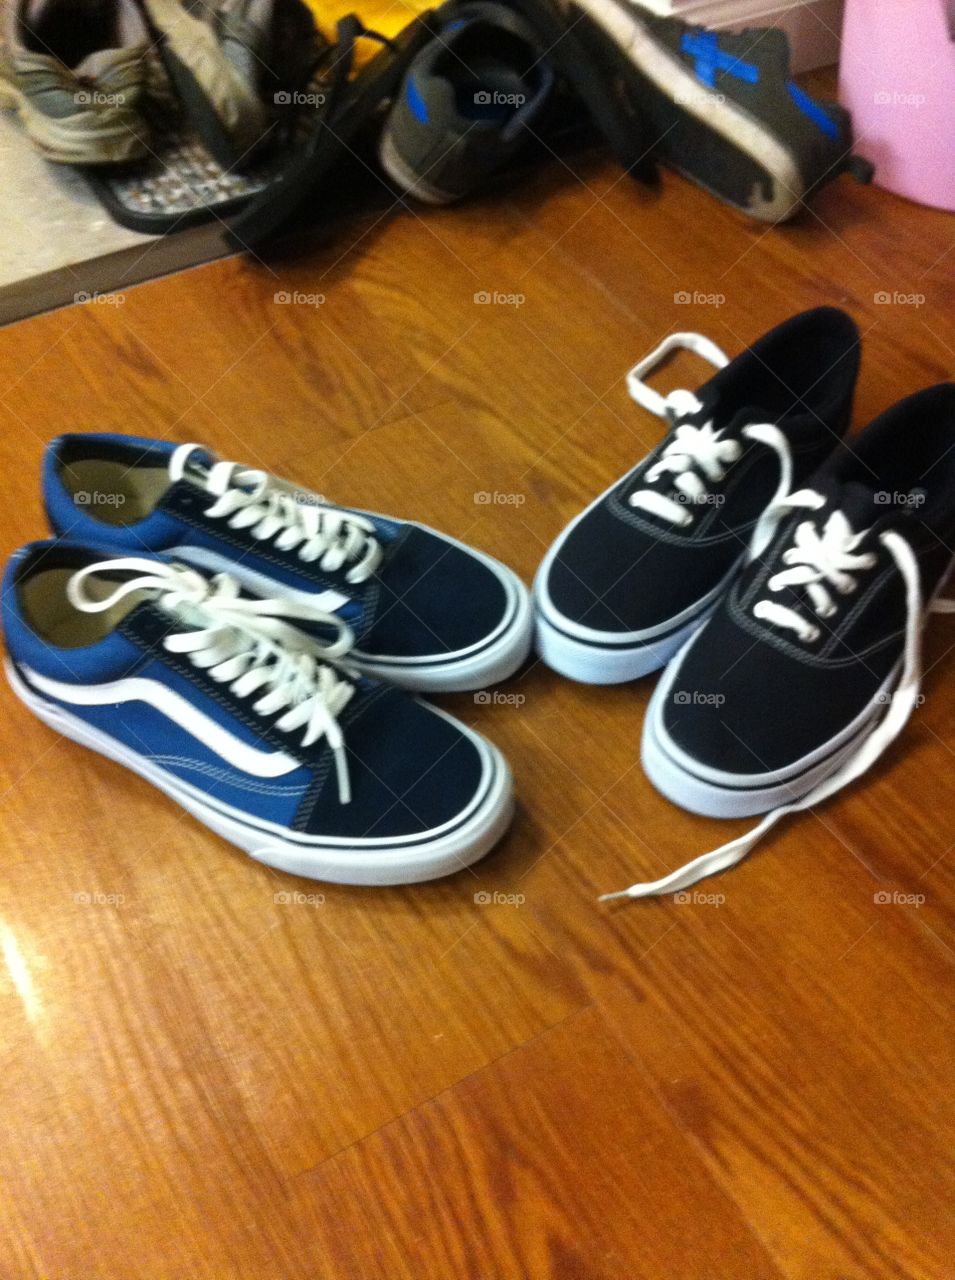 Two pairs of Vans sneakers in blue and black